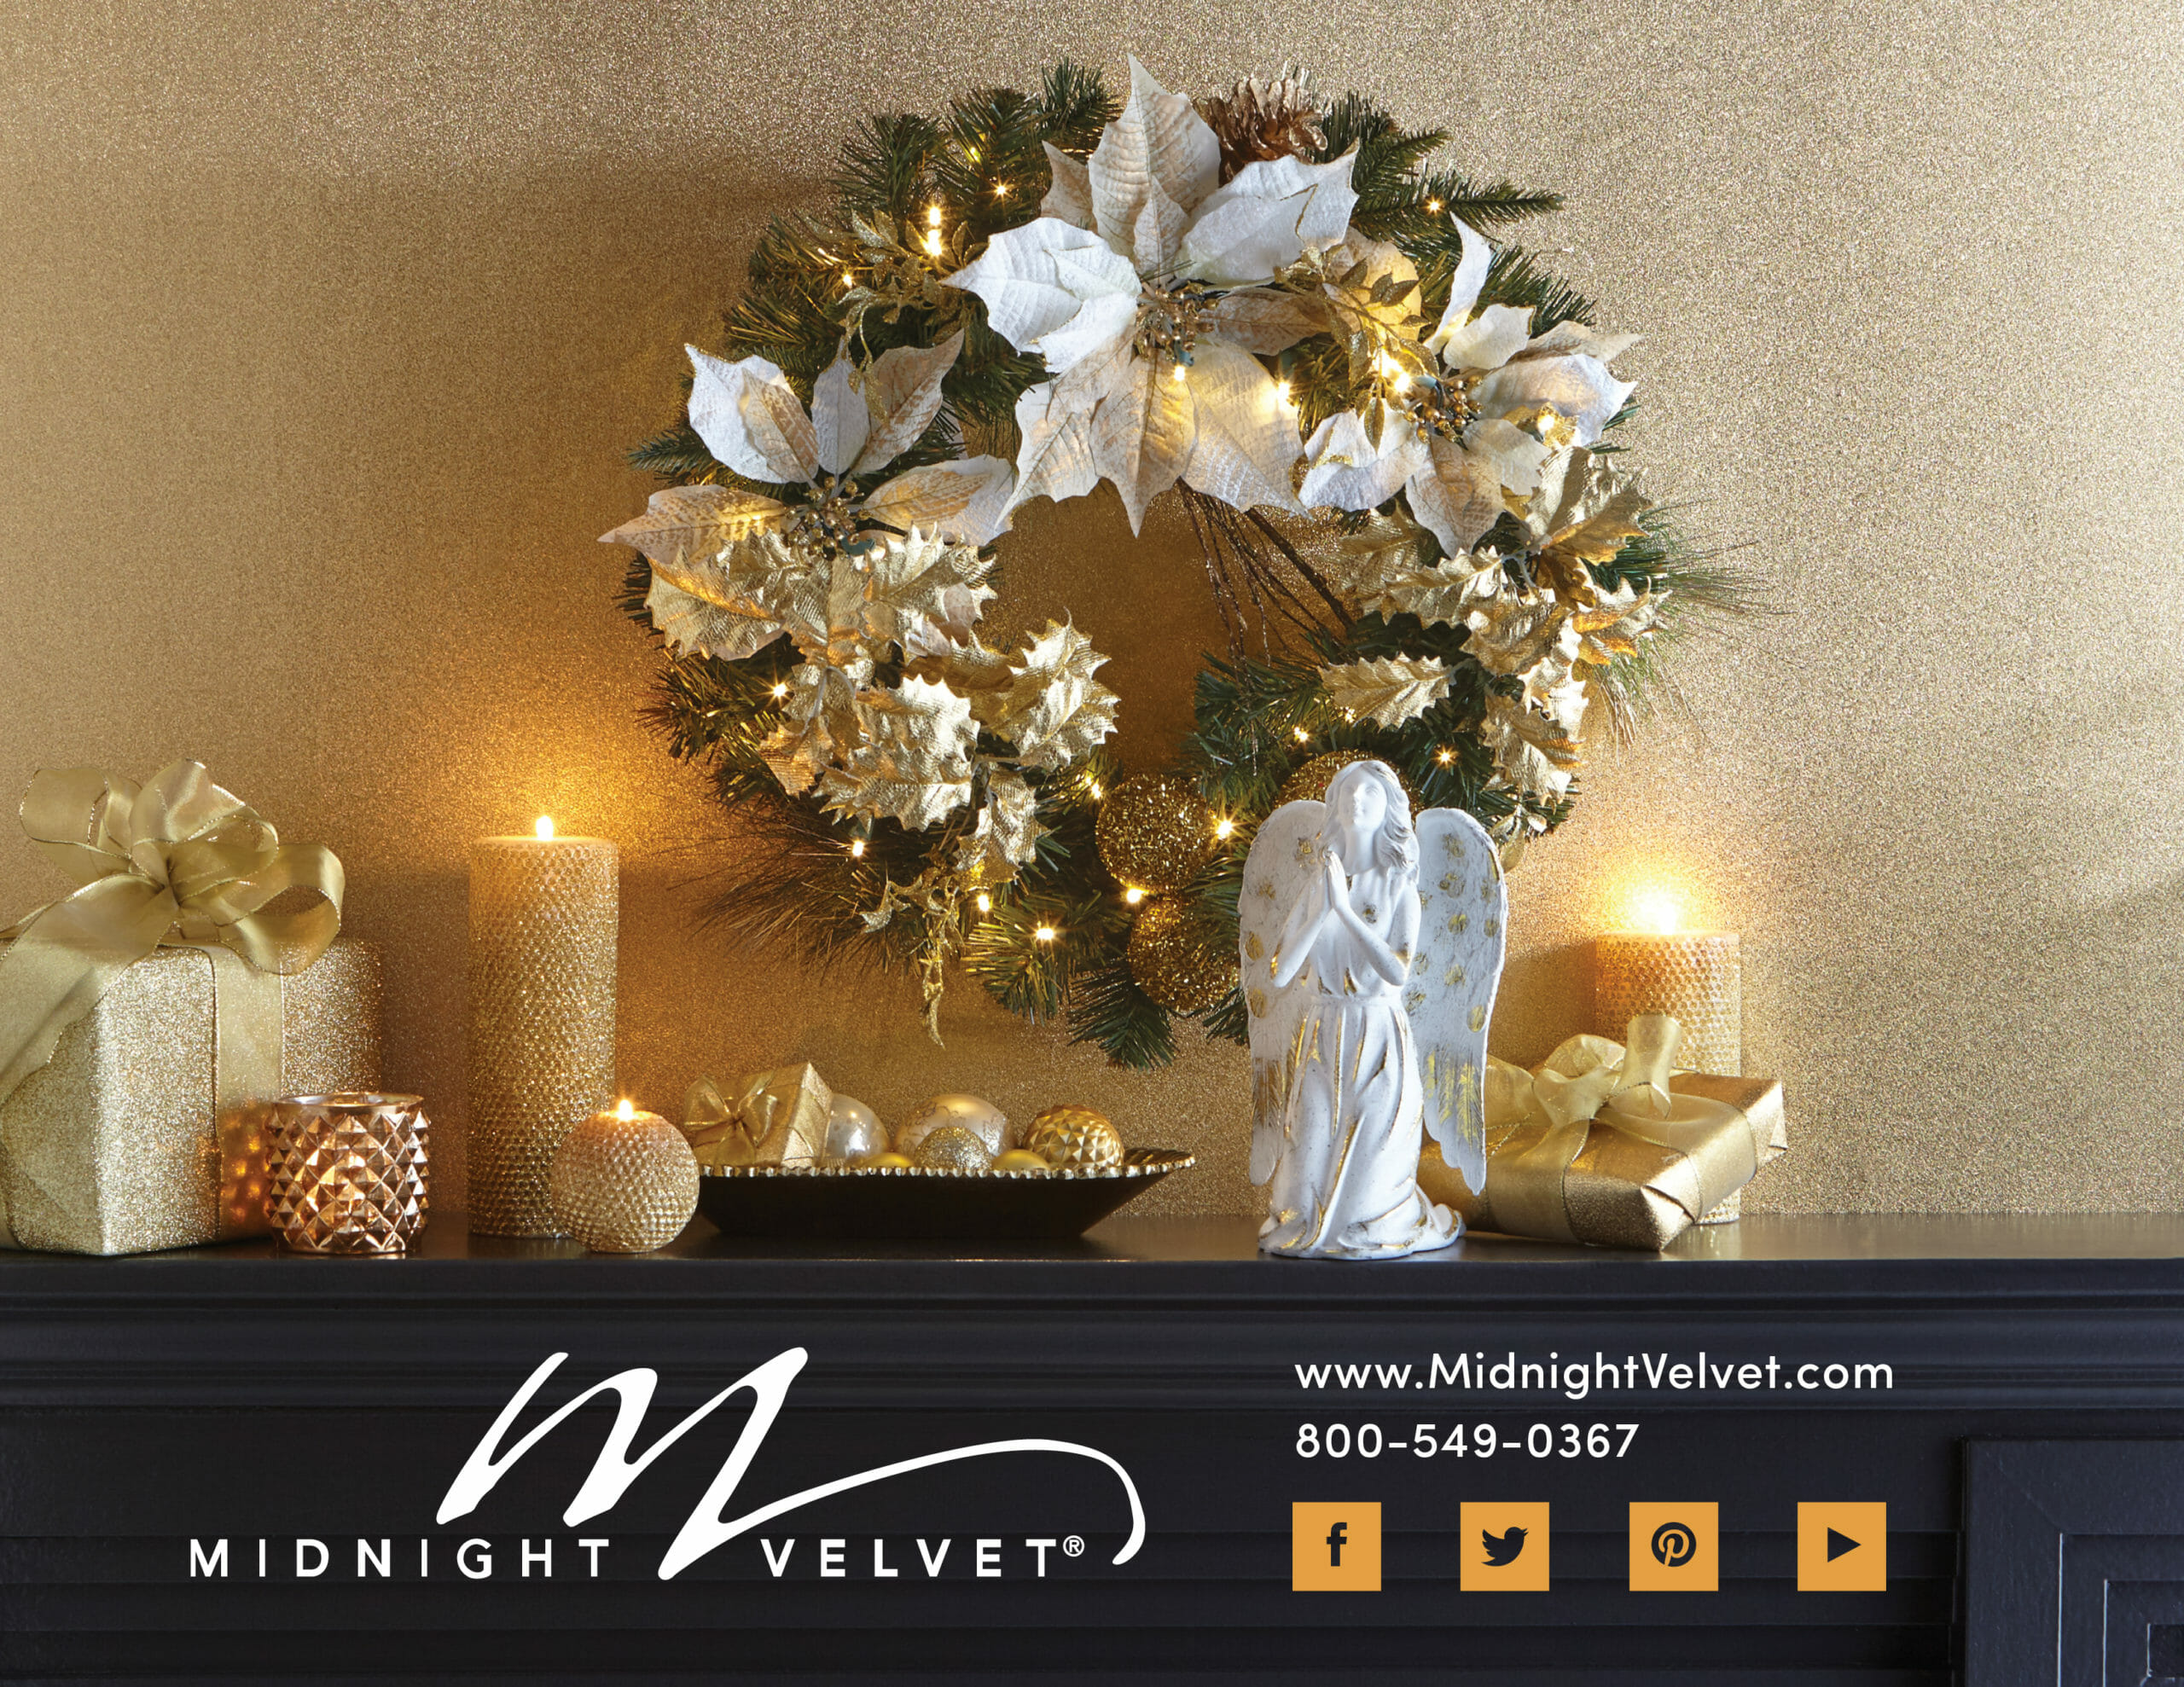 A mantle display of a lit white and gold poinsettia wreath, gold lit candles, wrapped presents, and a white praising angel.